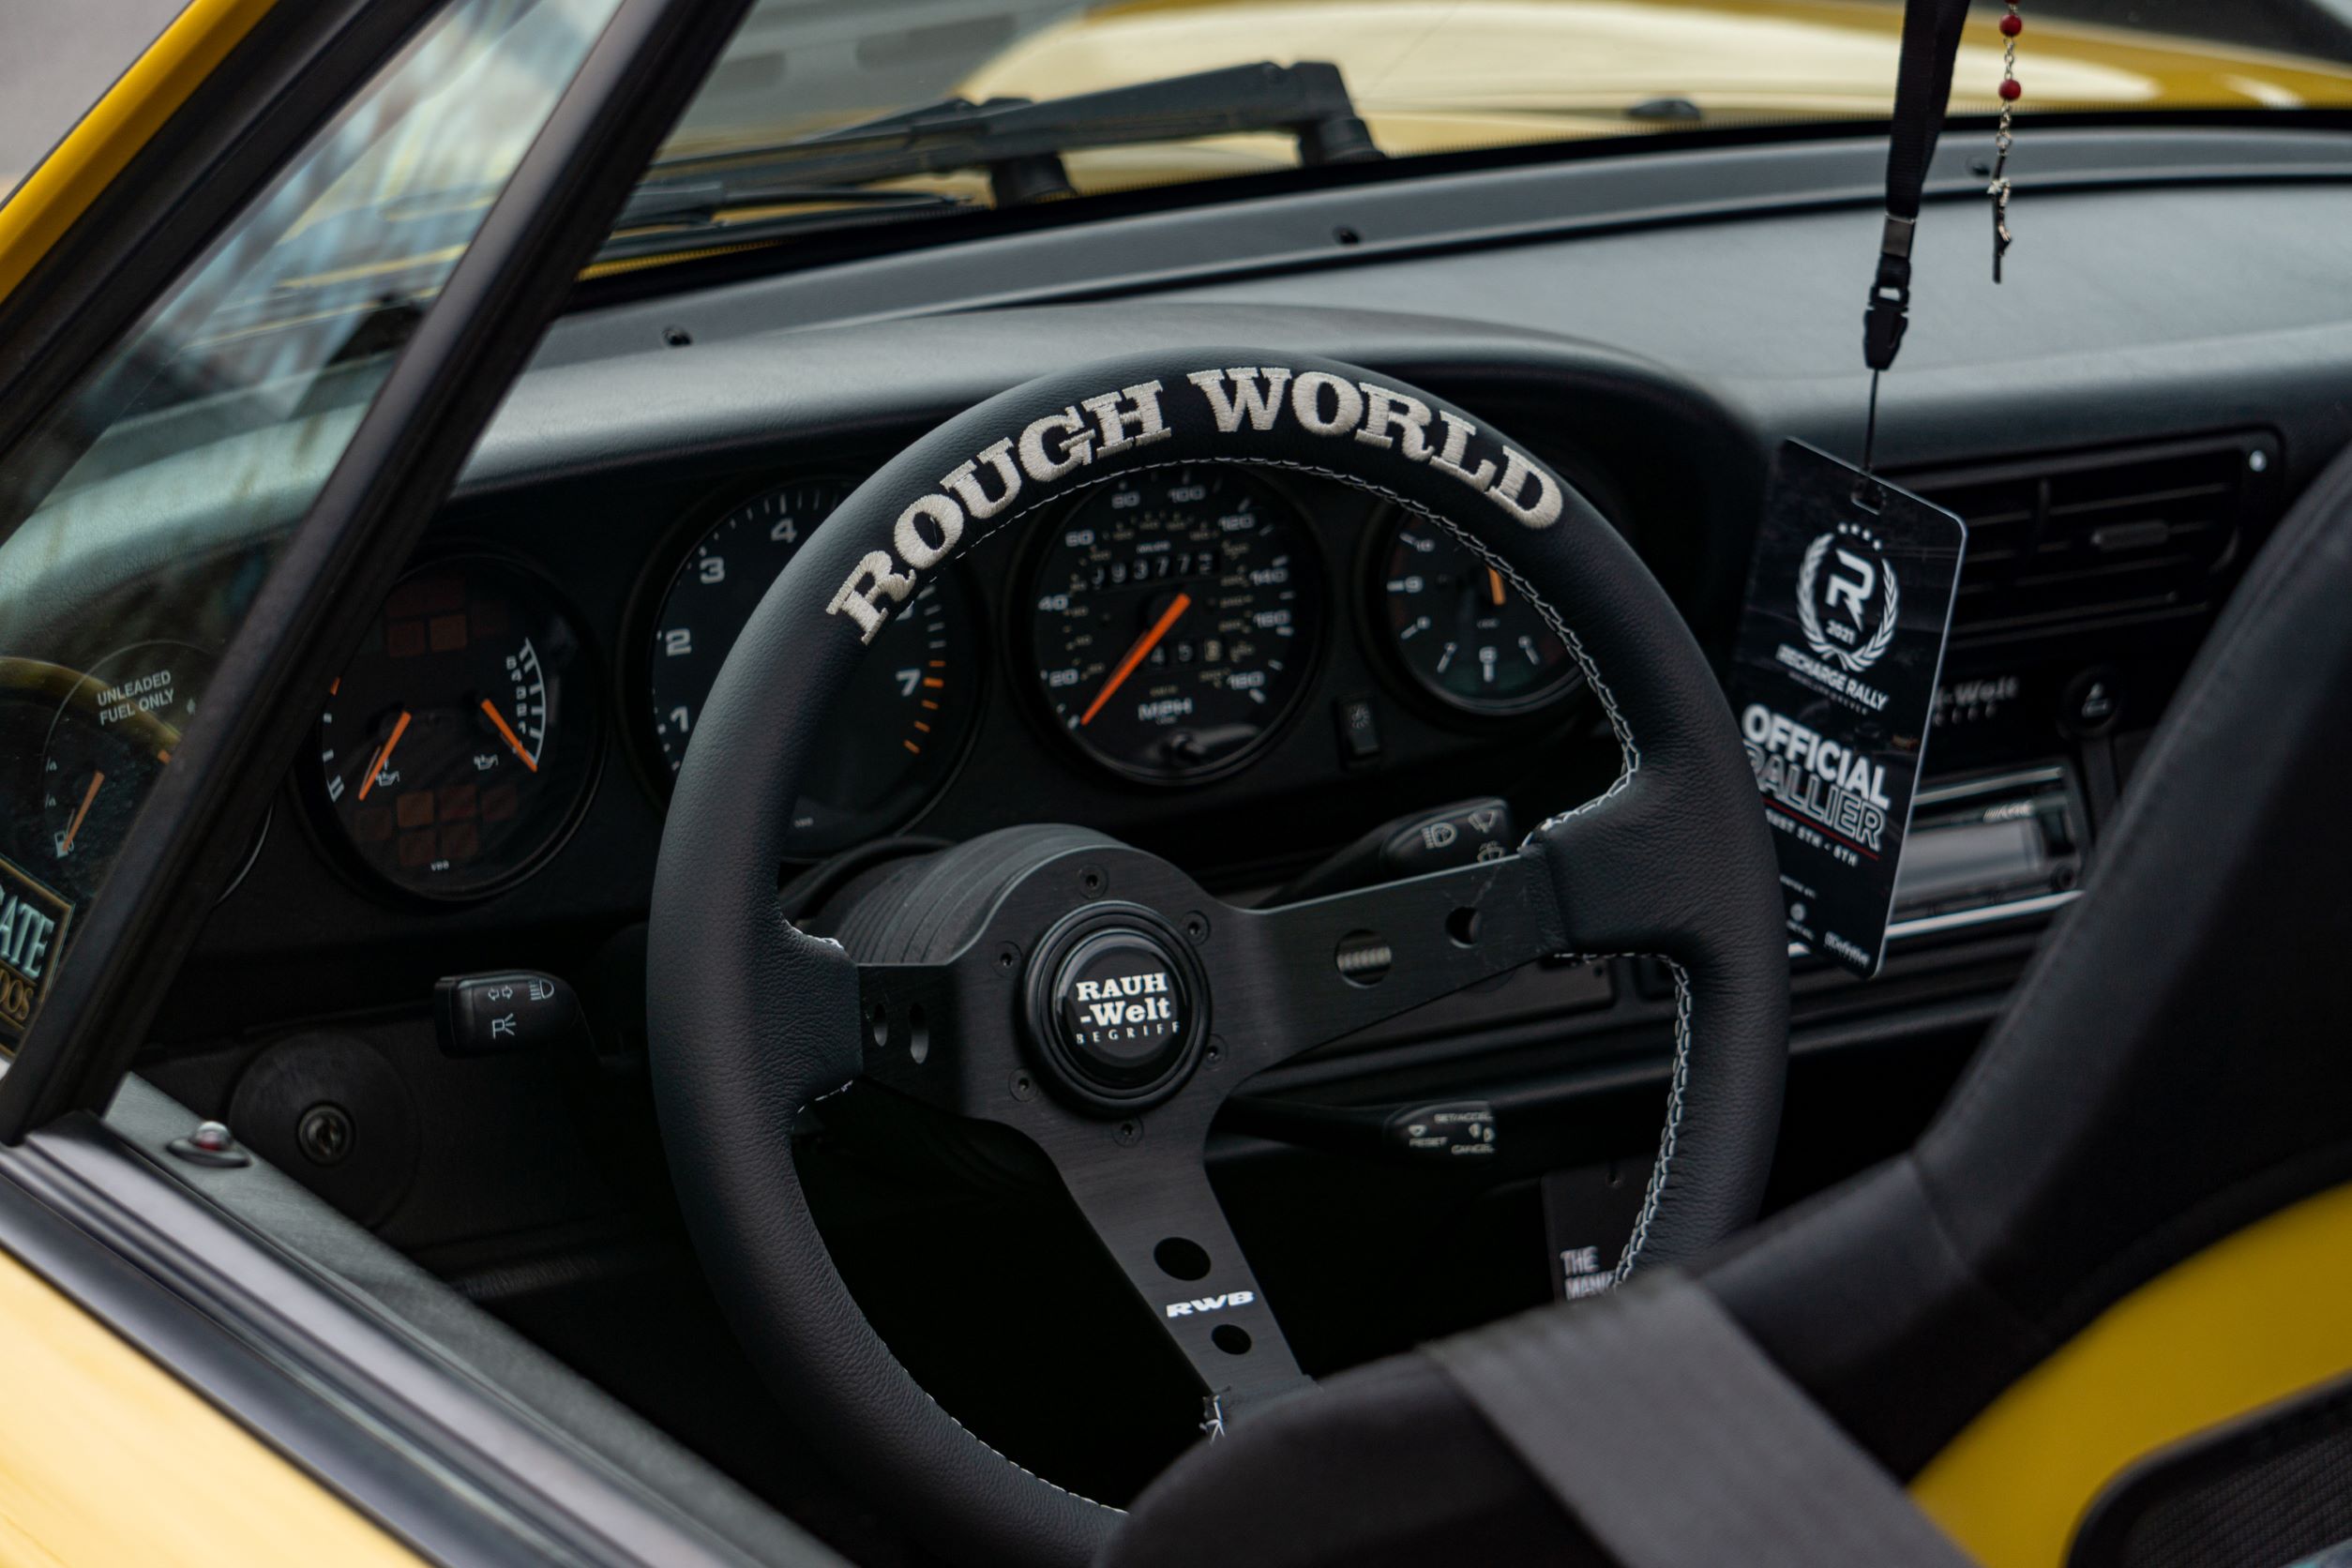 The black steering wheel, gauges, and seat of the yellow-and-black RWB Porsche 993 911 Cabriolet 'Nohra'